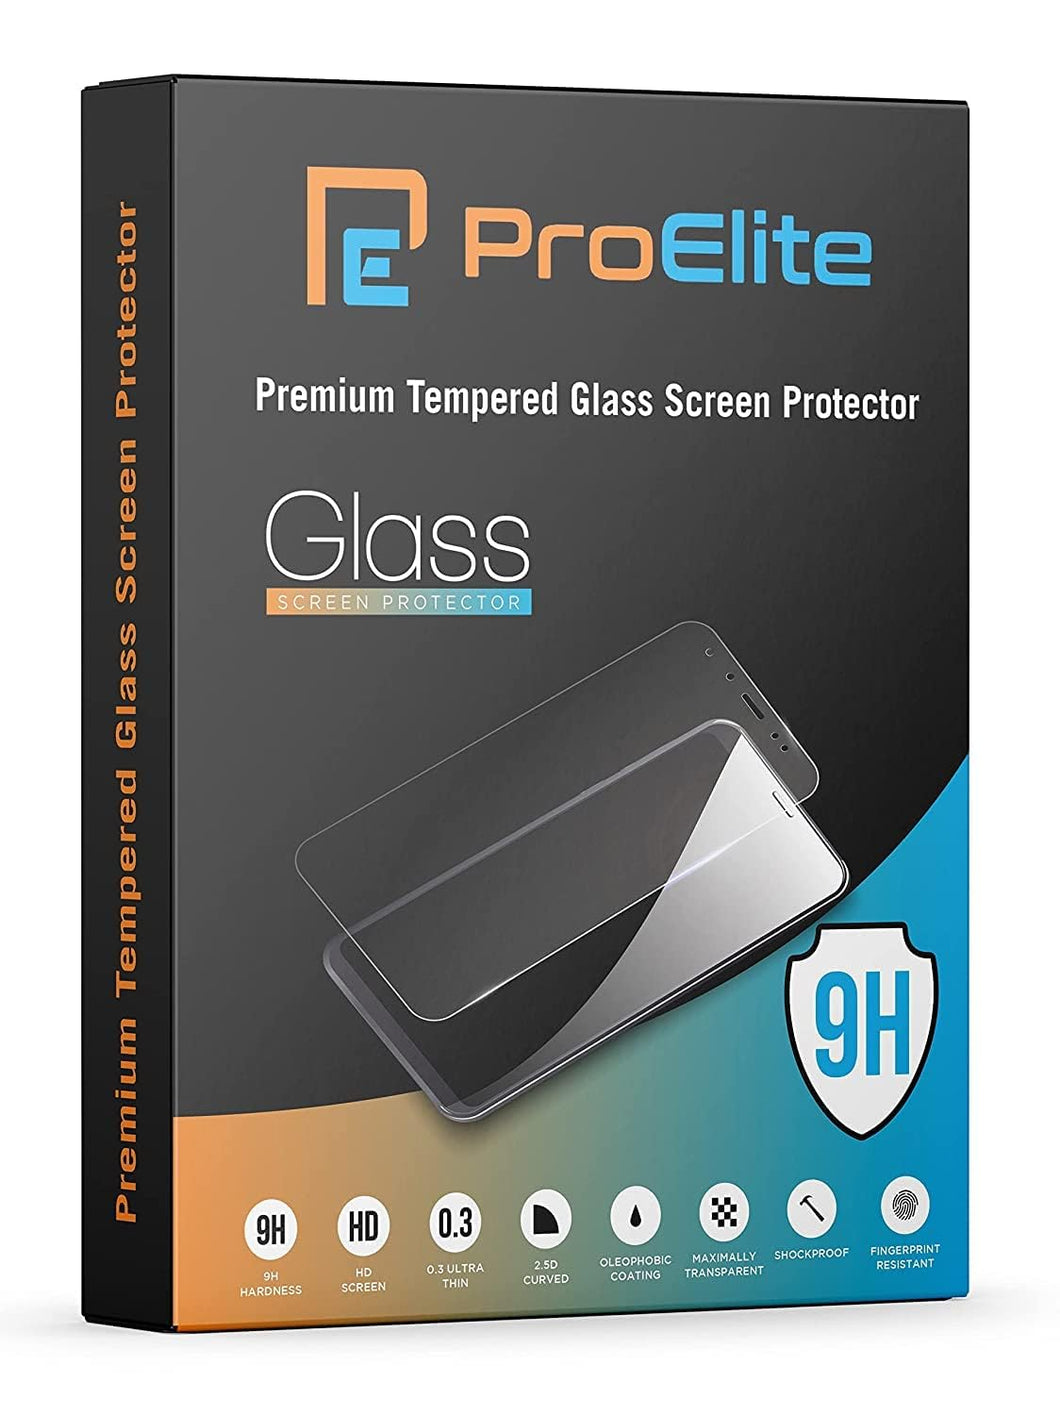 ProElite Premium Tempered Glass Screen Protector for Samsung Galaxy Tab S6 Lite 10.4 inch SM-P610/P615